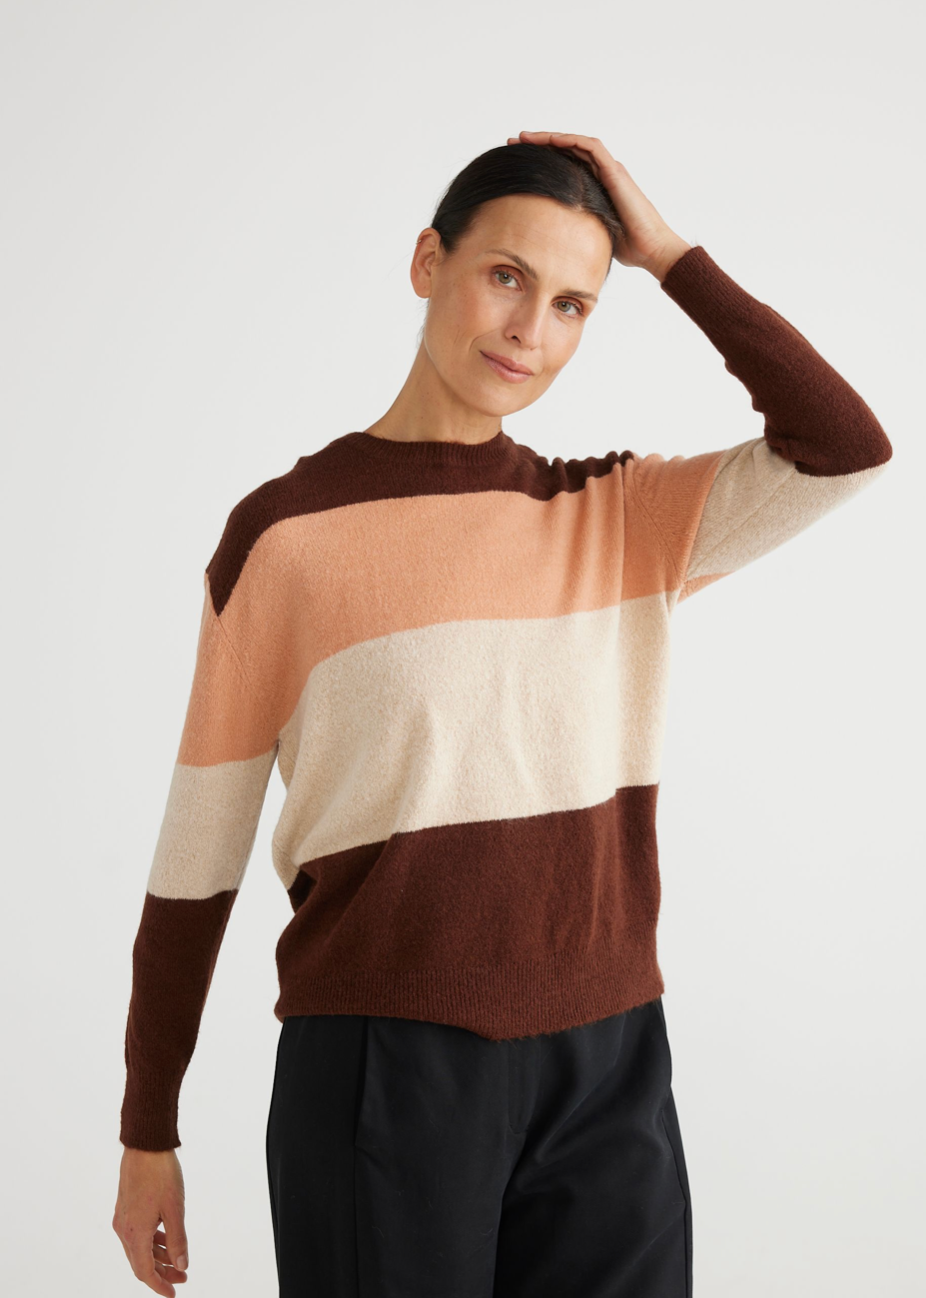 Buckley Knit - Clay + Cocoa + Biscotti - Daisy Grace Lifestyle